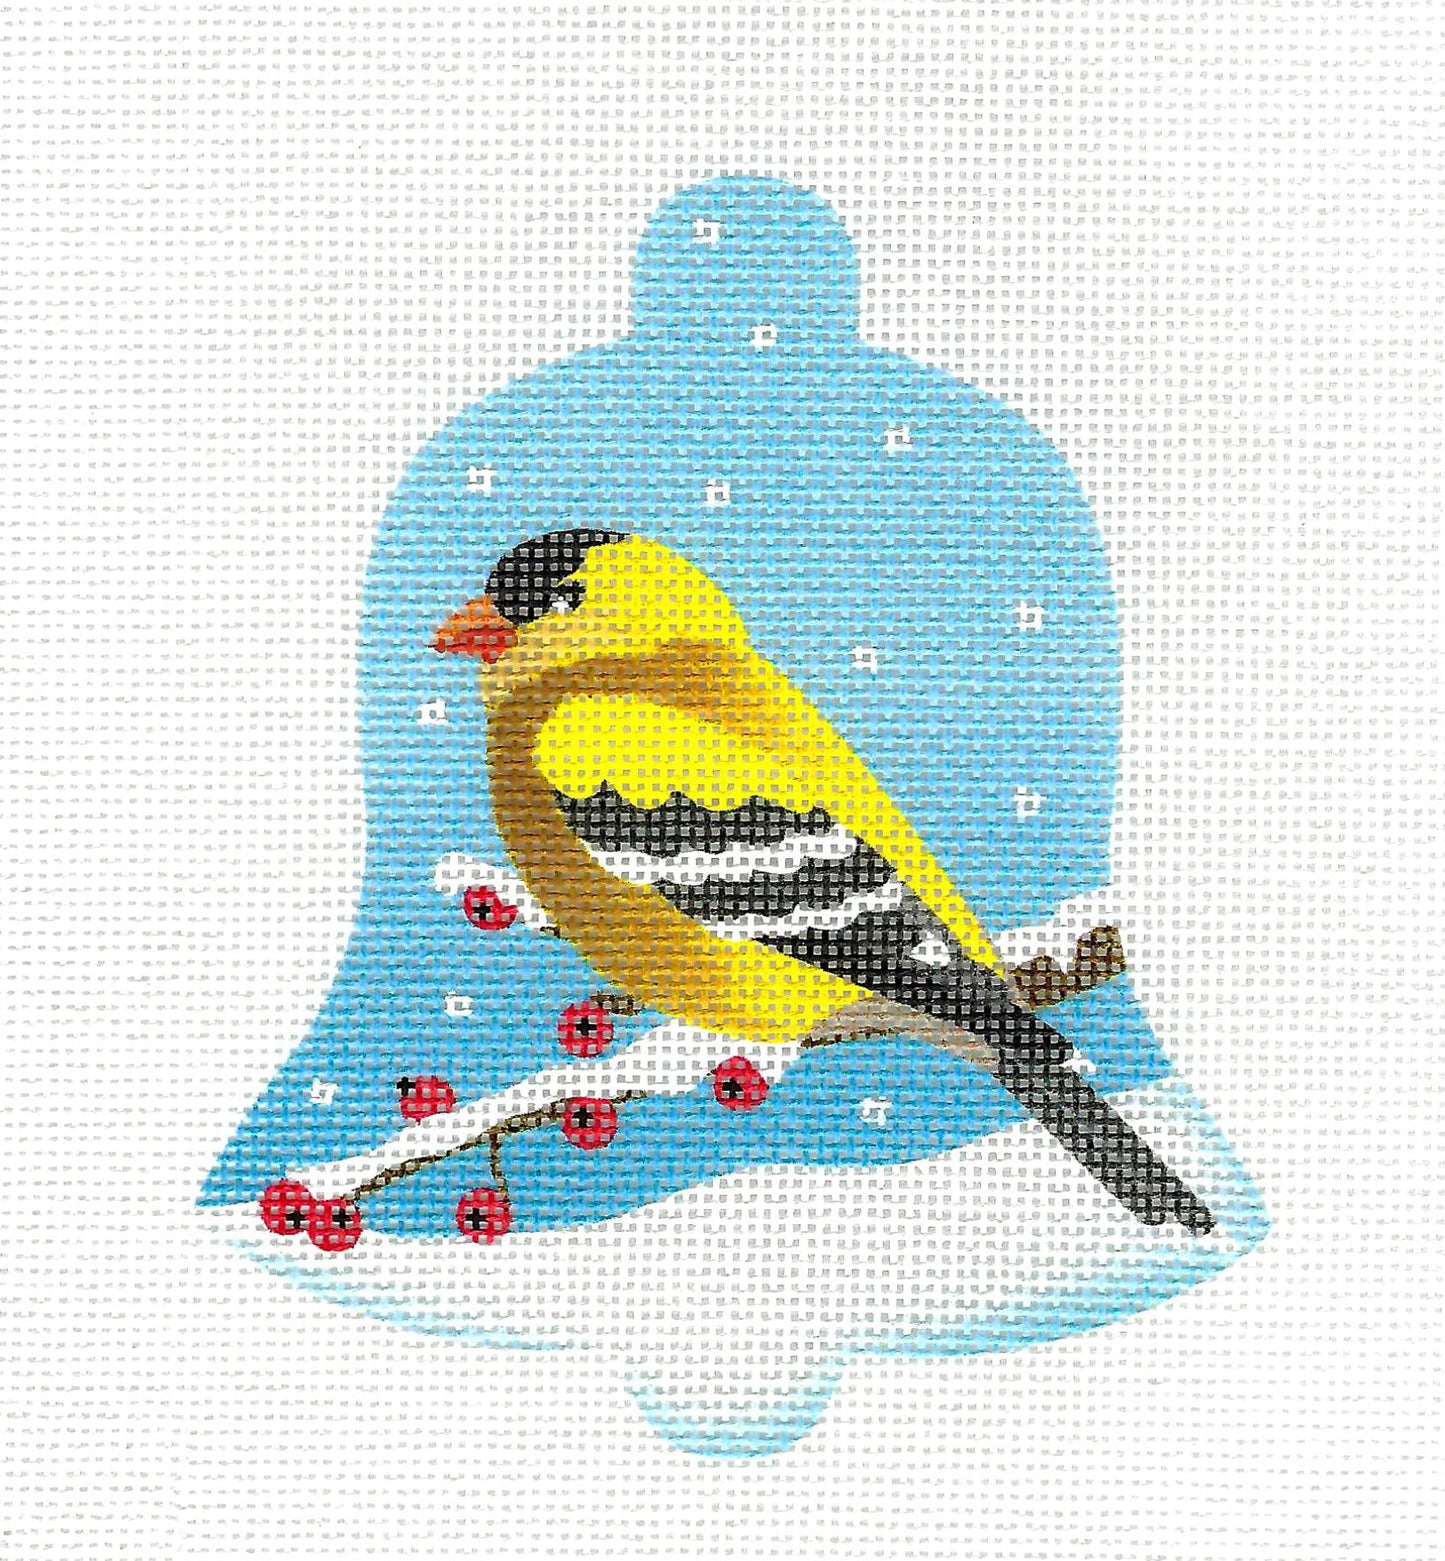 Bird Bell ~ Goldfinch on Branch in Snow Bird Bell handpainted Needlepoint Ornament Canvas by Pepperberry